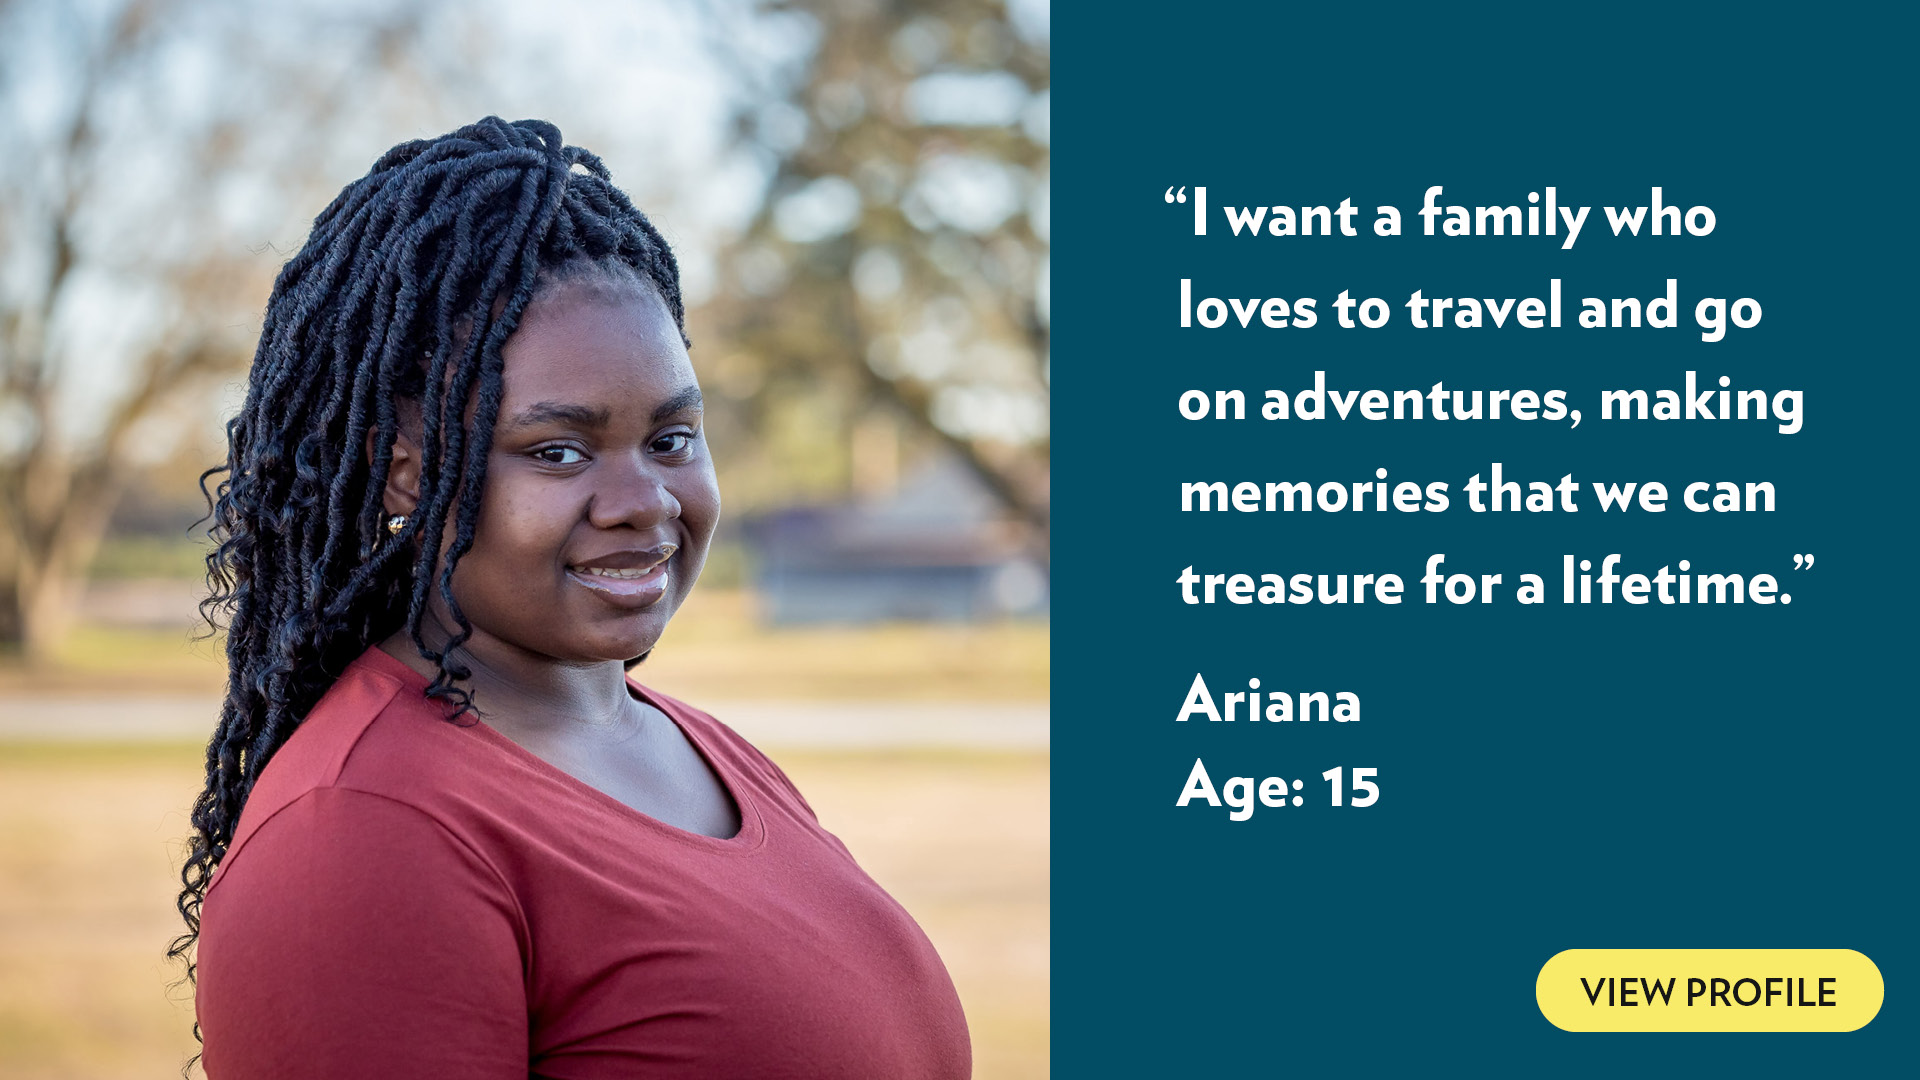 I want a family who loves to travel and go on adventures, making memories that we can treasure for a lifetime. Ariana, age 15. View profile.